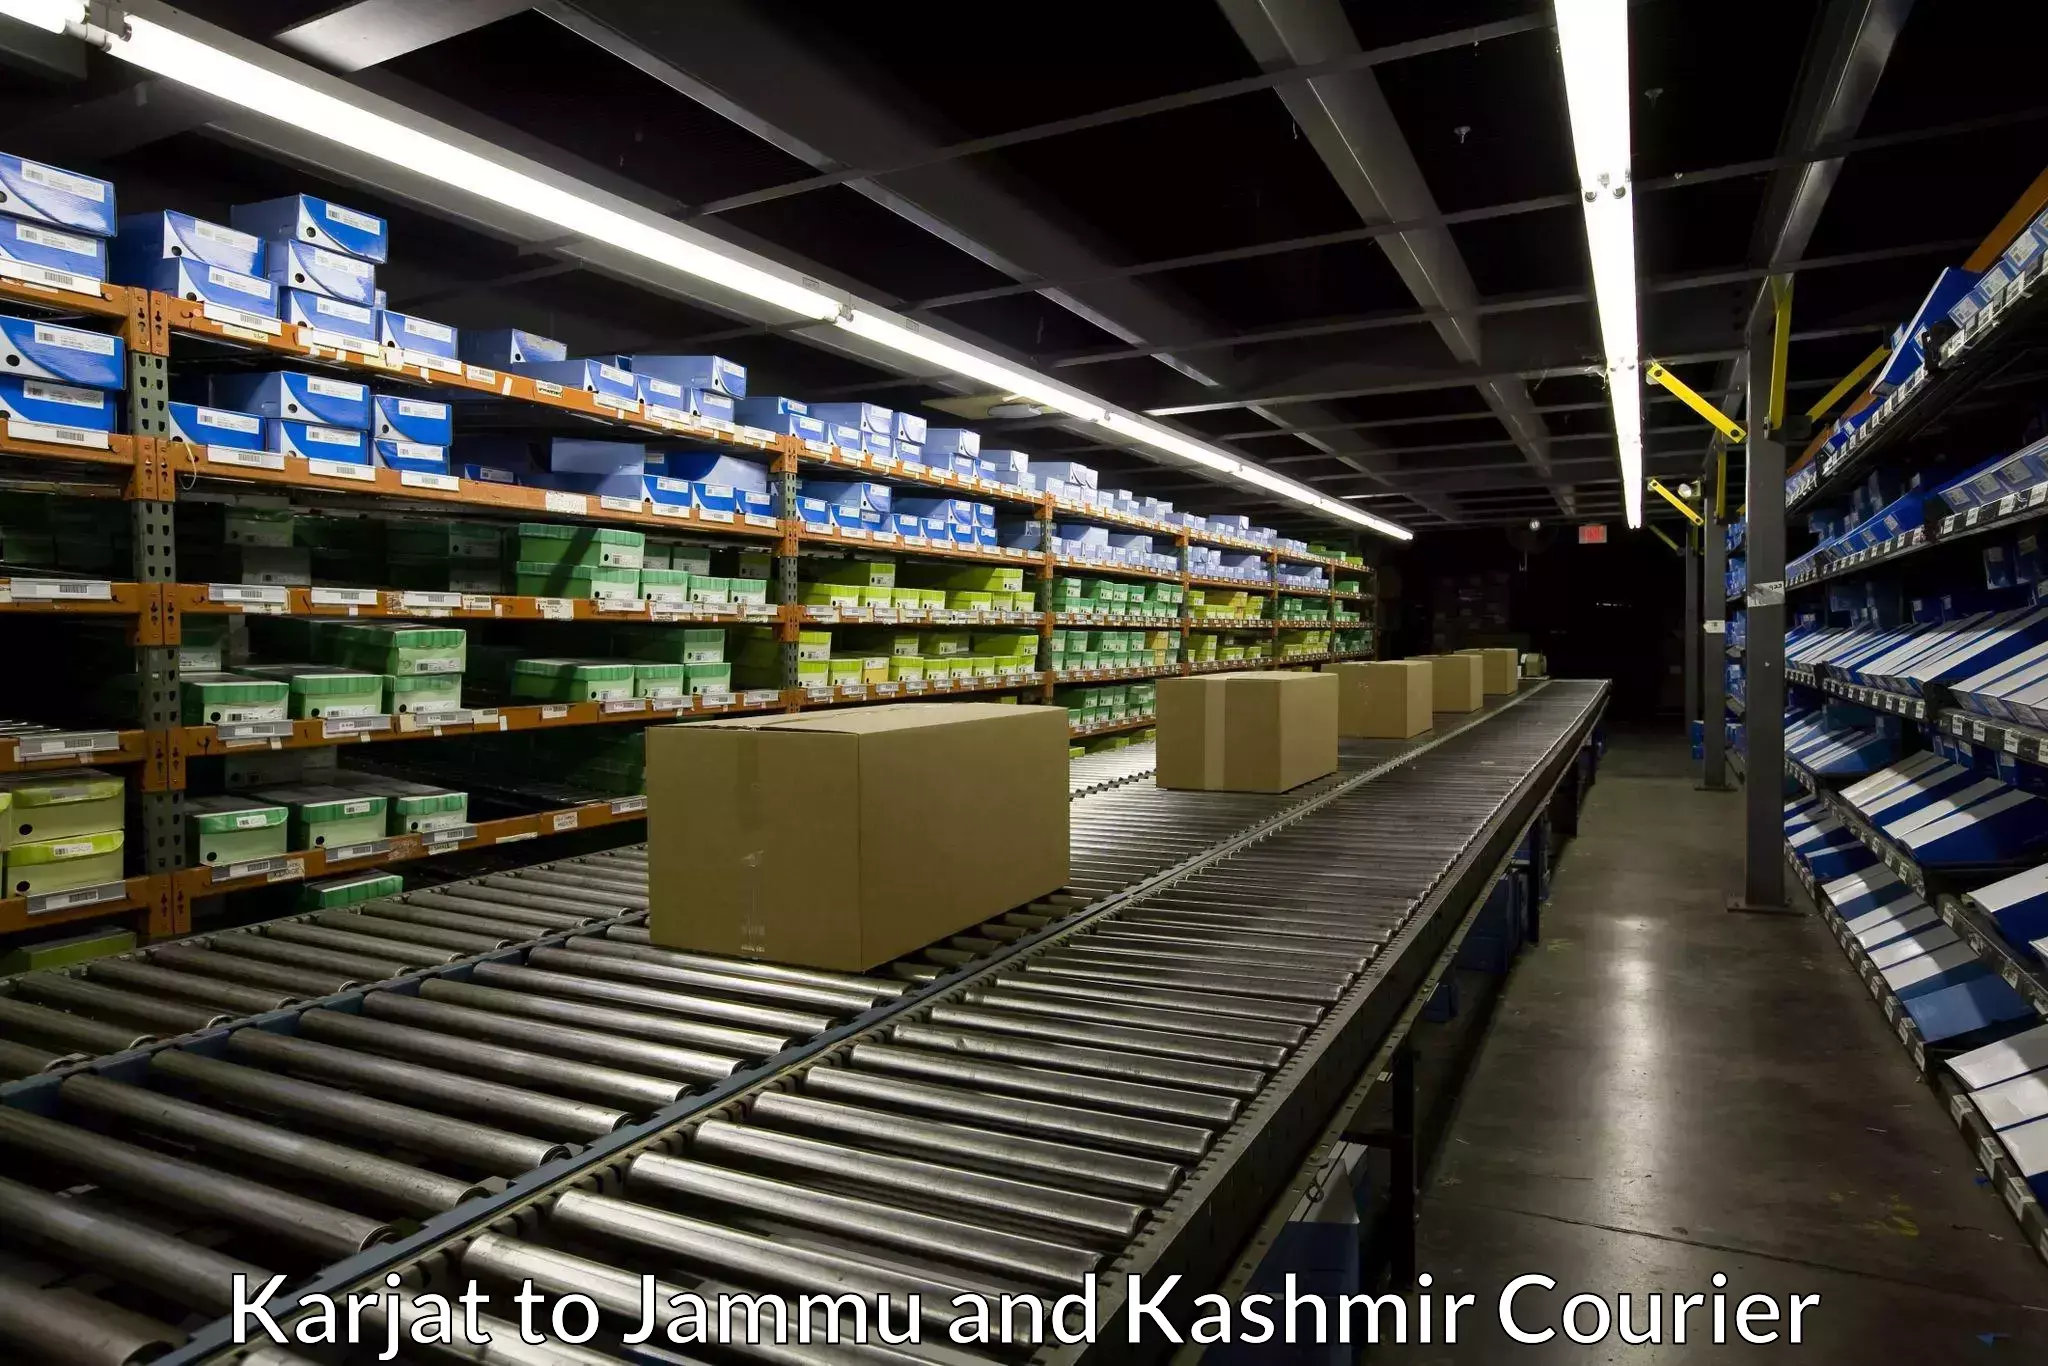 Nationwide shipping capabilities in Karjat to Baramulla